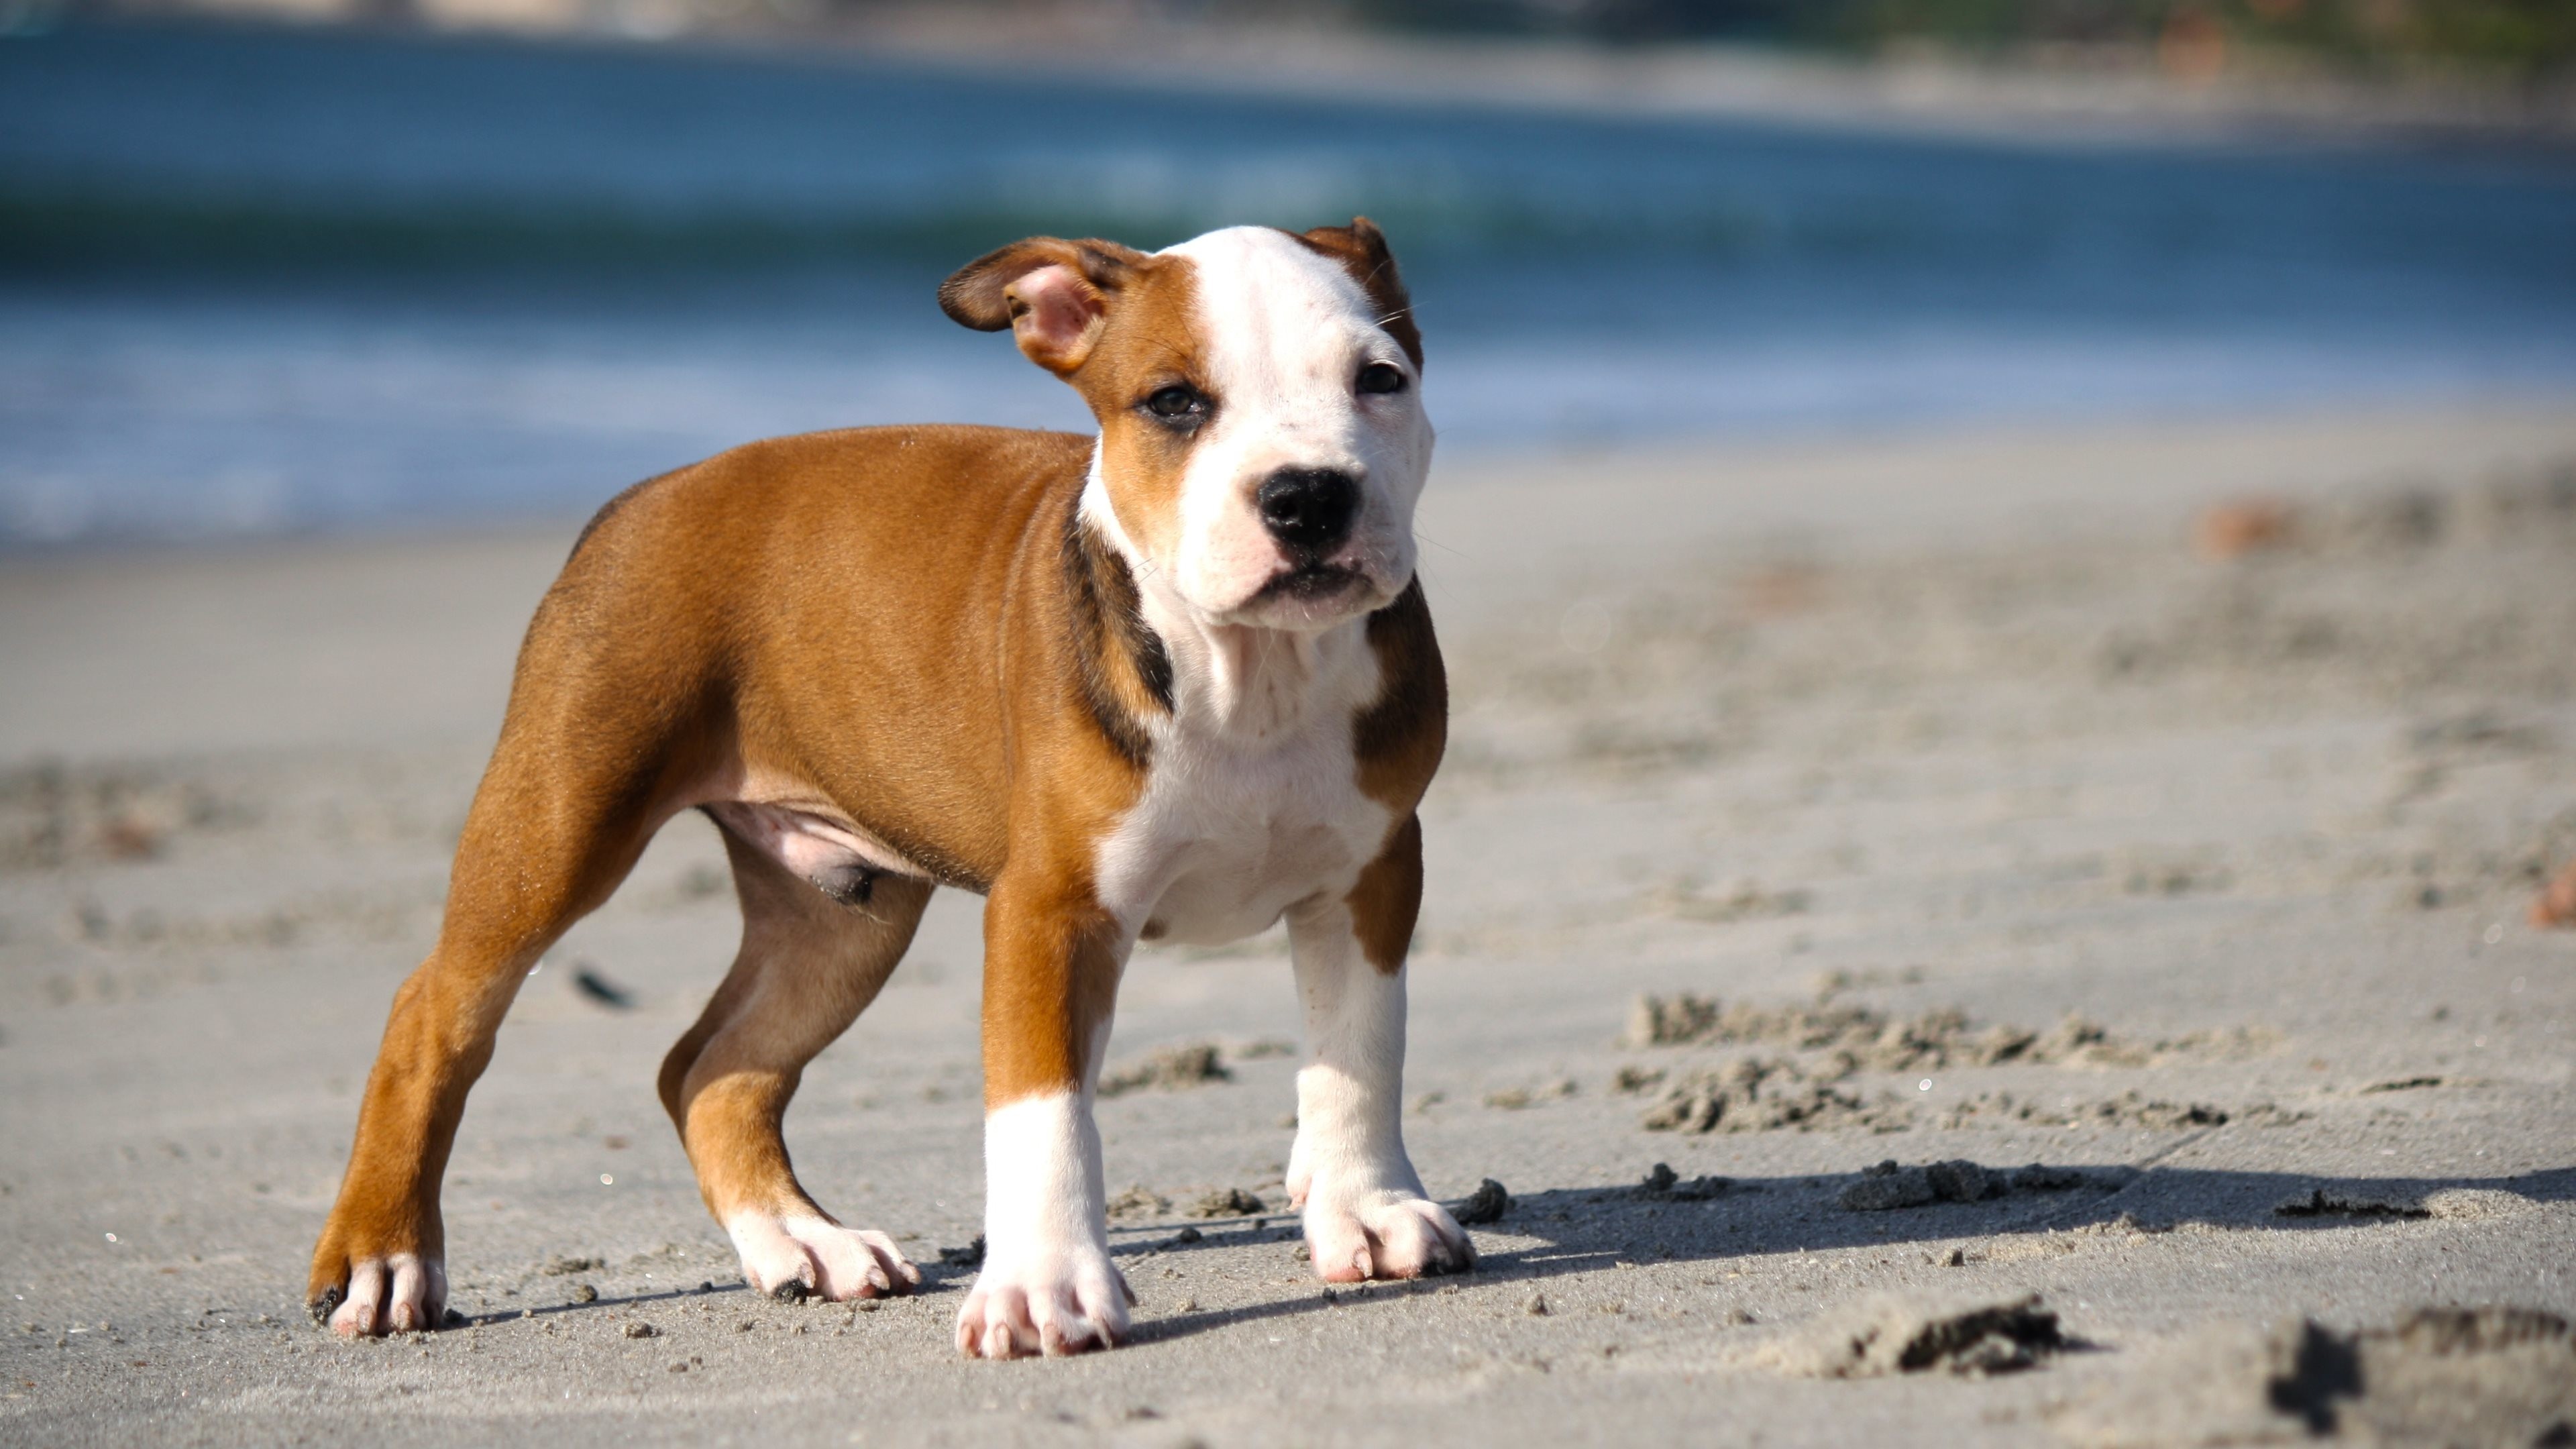 3840x2160 pitbull puppy wallpaper hd with high resolution wallpaper on animal  category similar with black cute dog